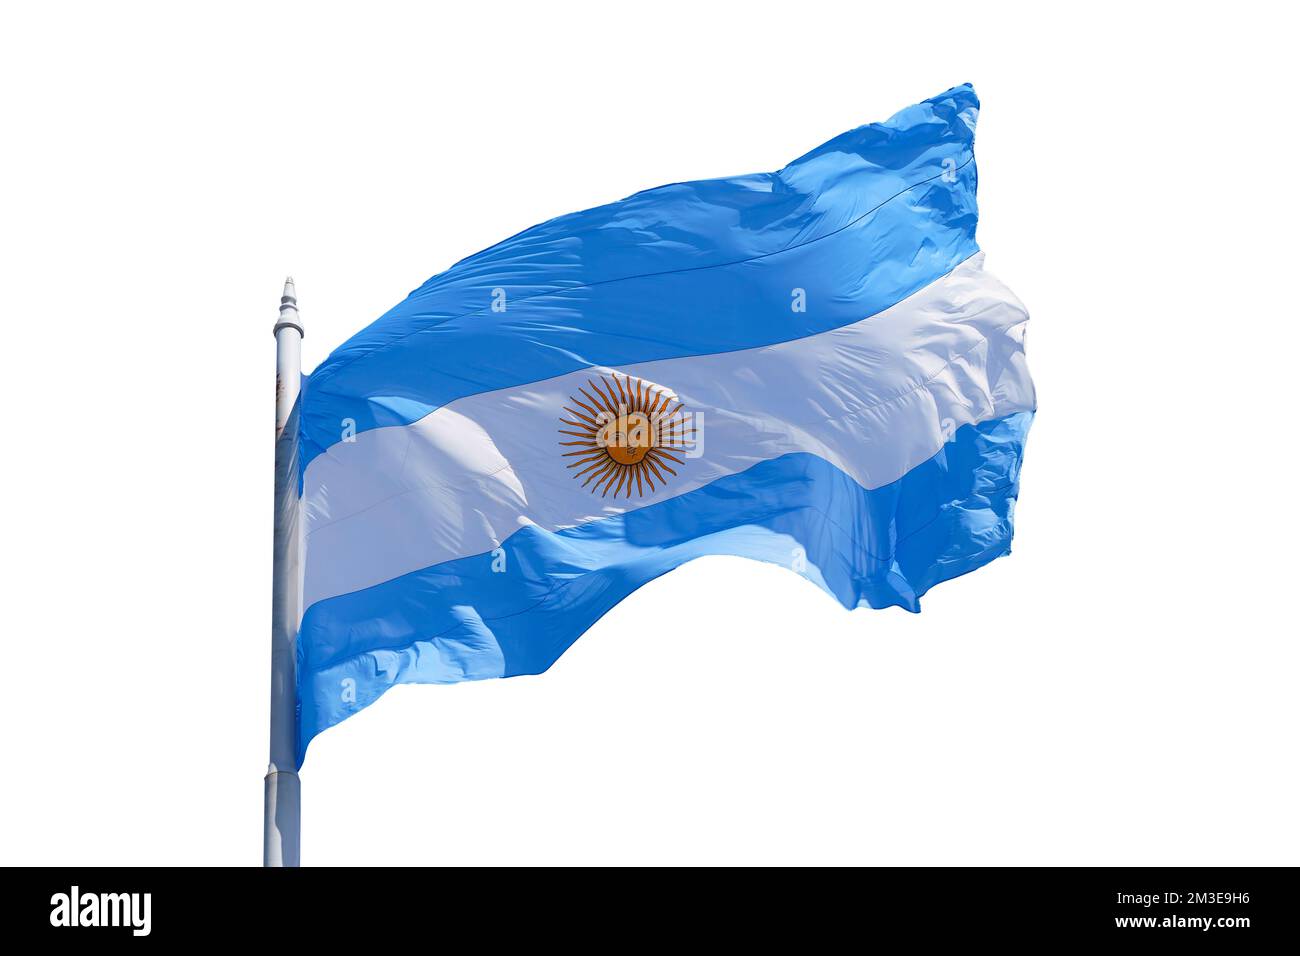 Argentine flag on a blank white background isolate. Blue and white National symbol of Argentinean culture and patriotism. High quality photo Stock Photo